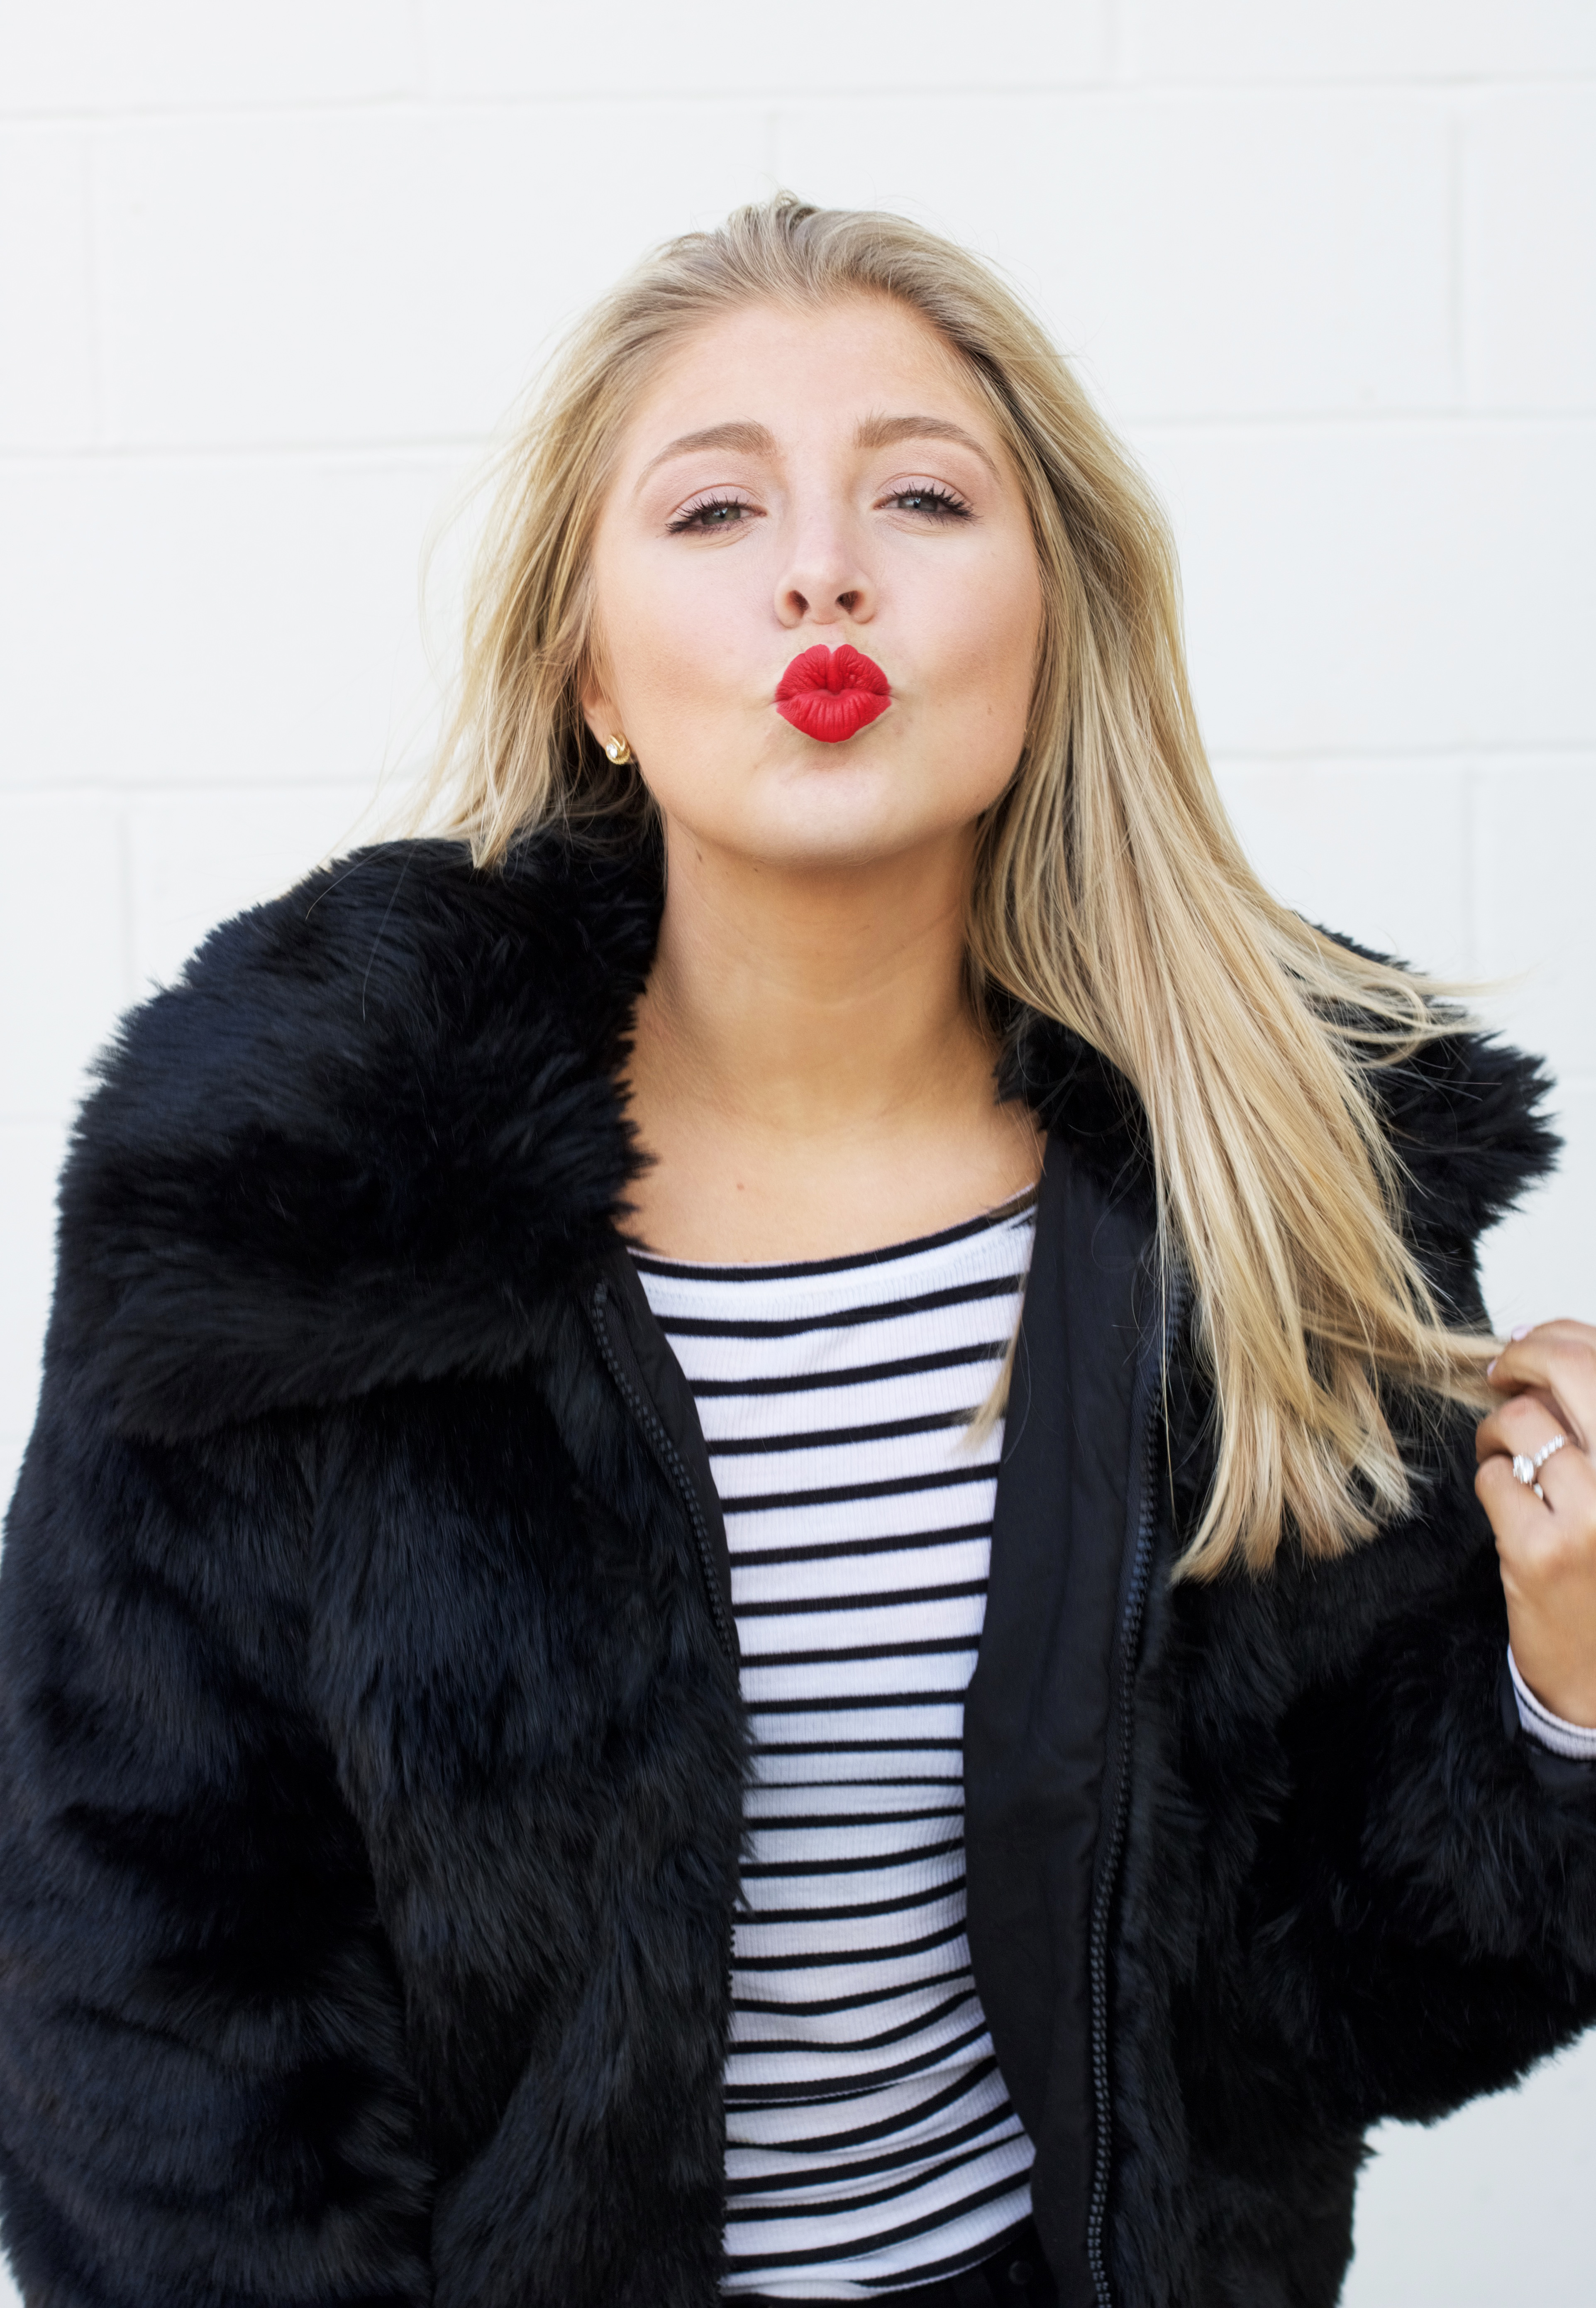 How to get perfect red lips